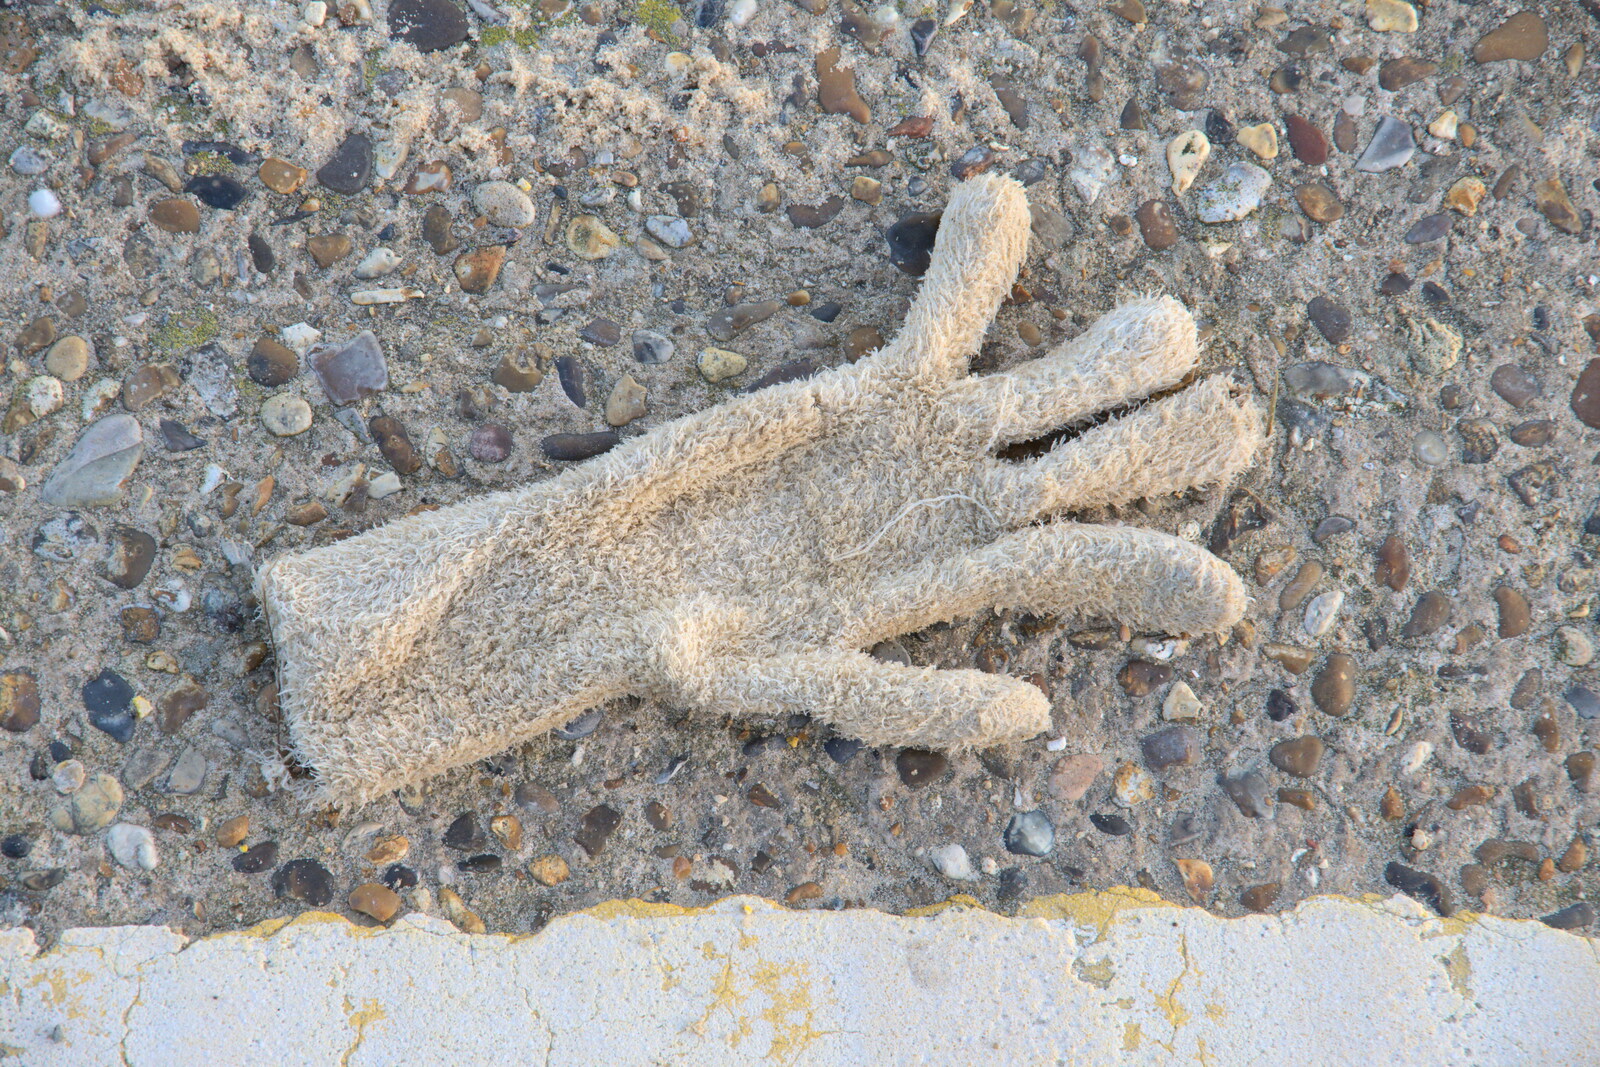 A discarded furry glove from A Return to the Beach, Southwold, Suffolk - 20th December 2020